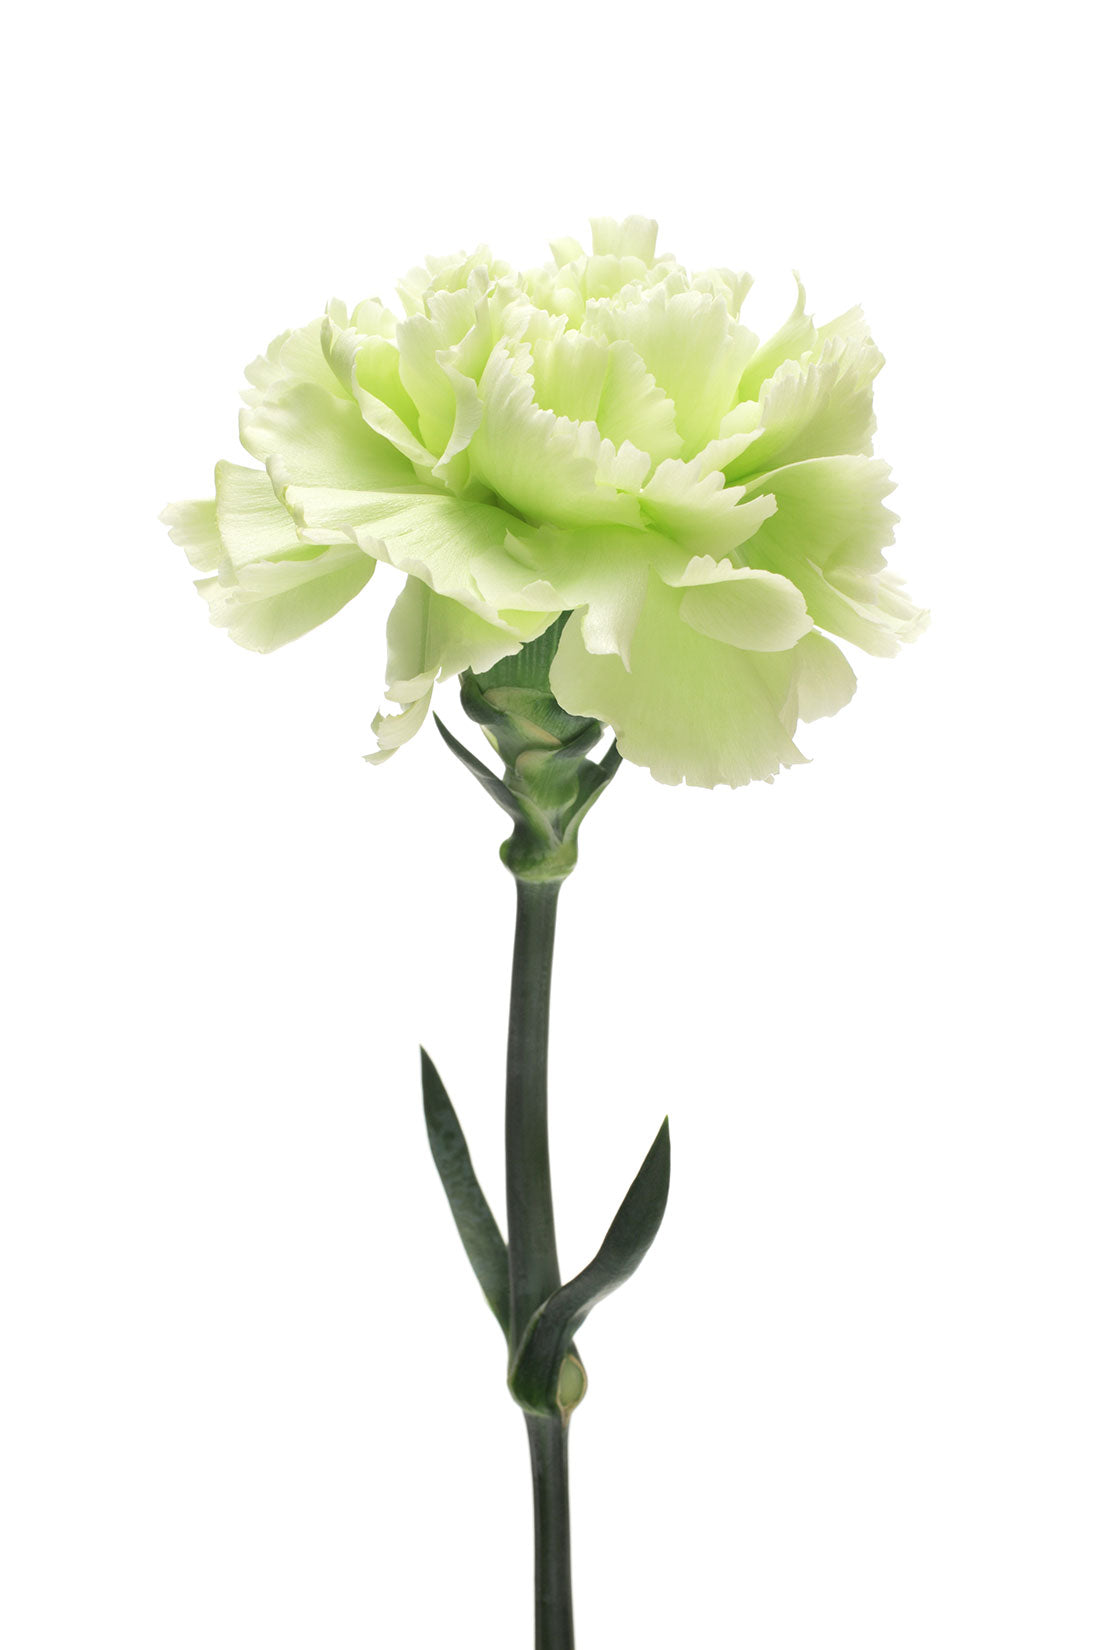 Carnations - Flowers - Featured Content - Lovingly